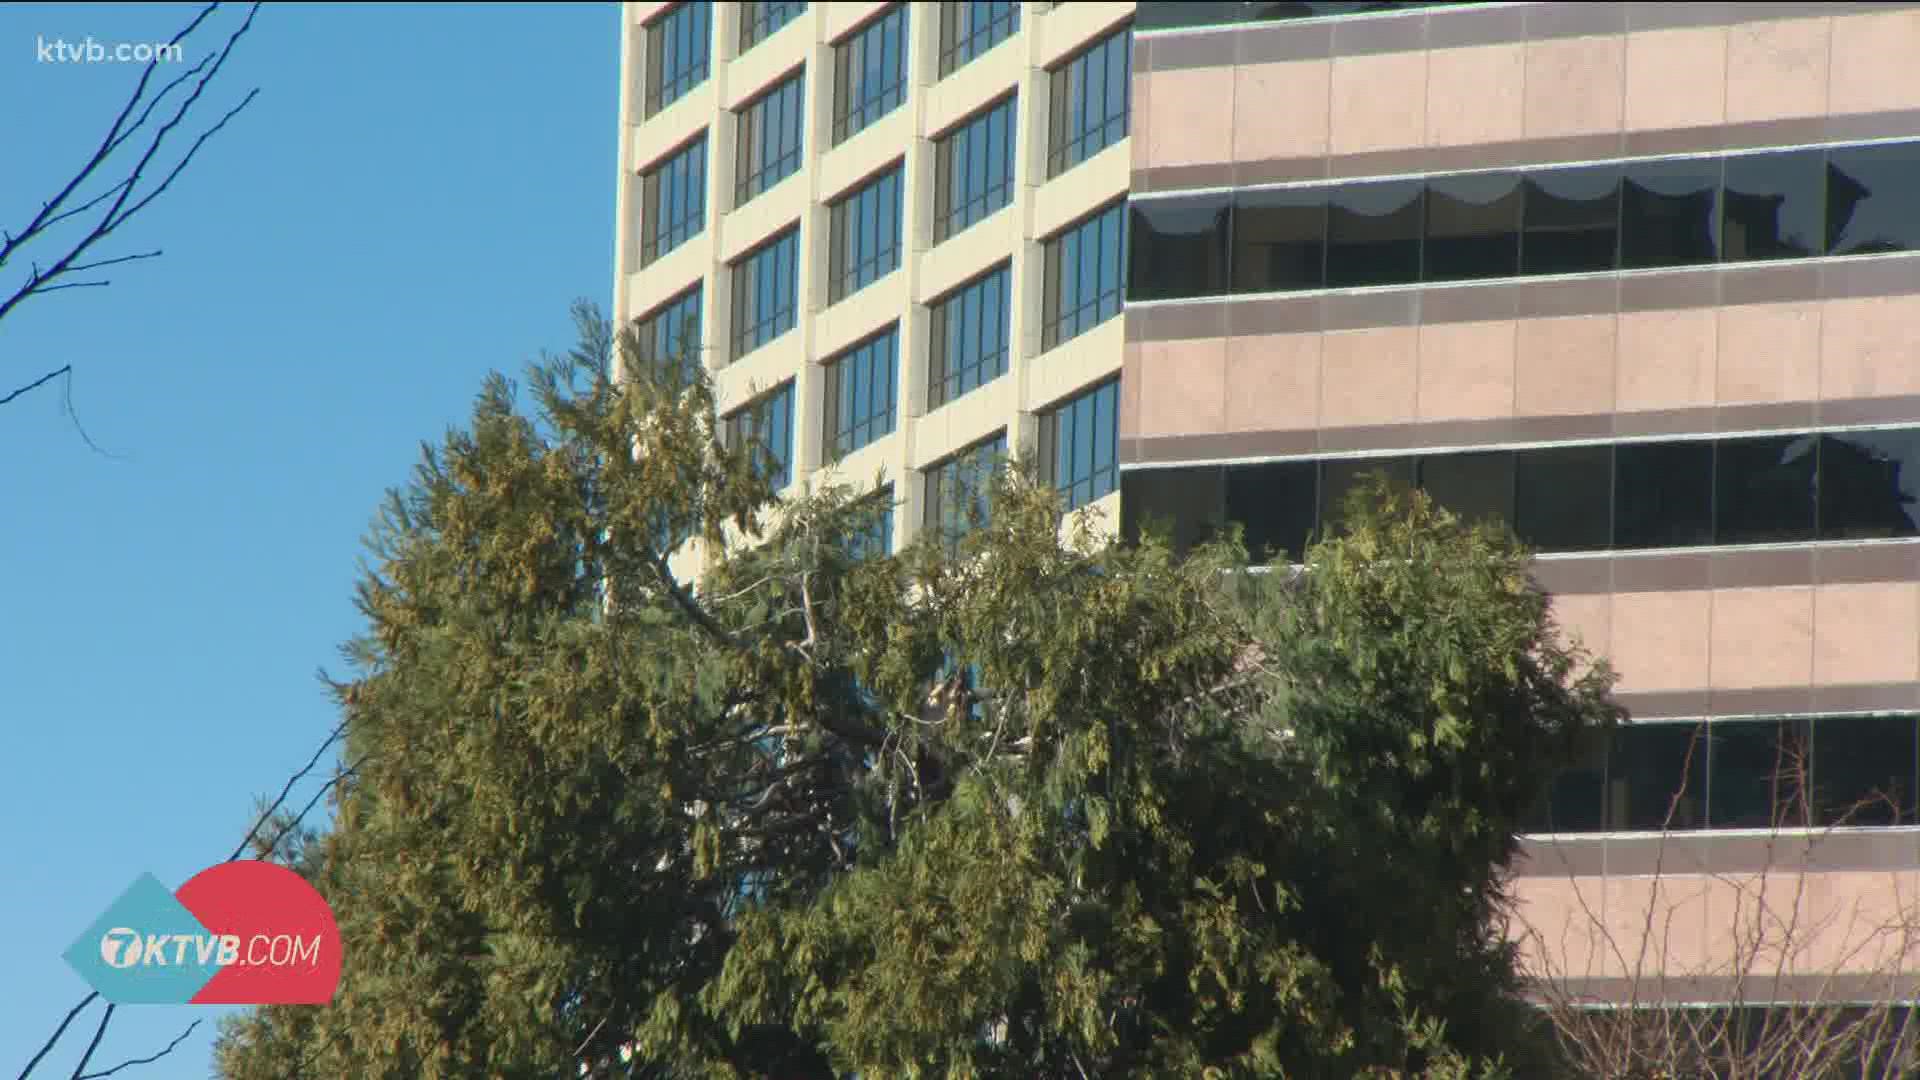 Misfortune has once again befallen the massive Christmas tree set up every year in downtown Boise's Grove Plaza.